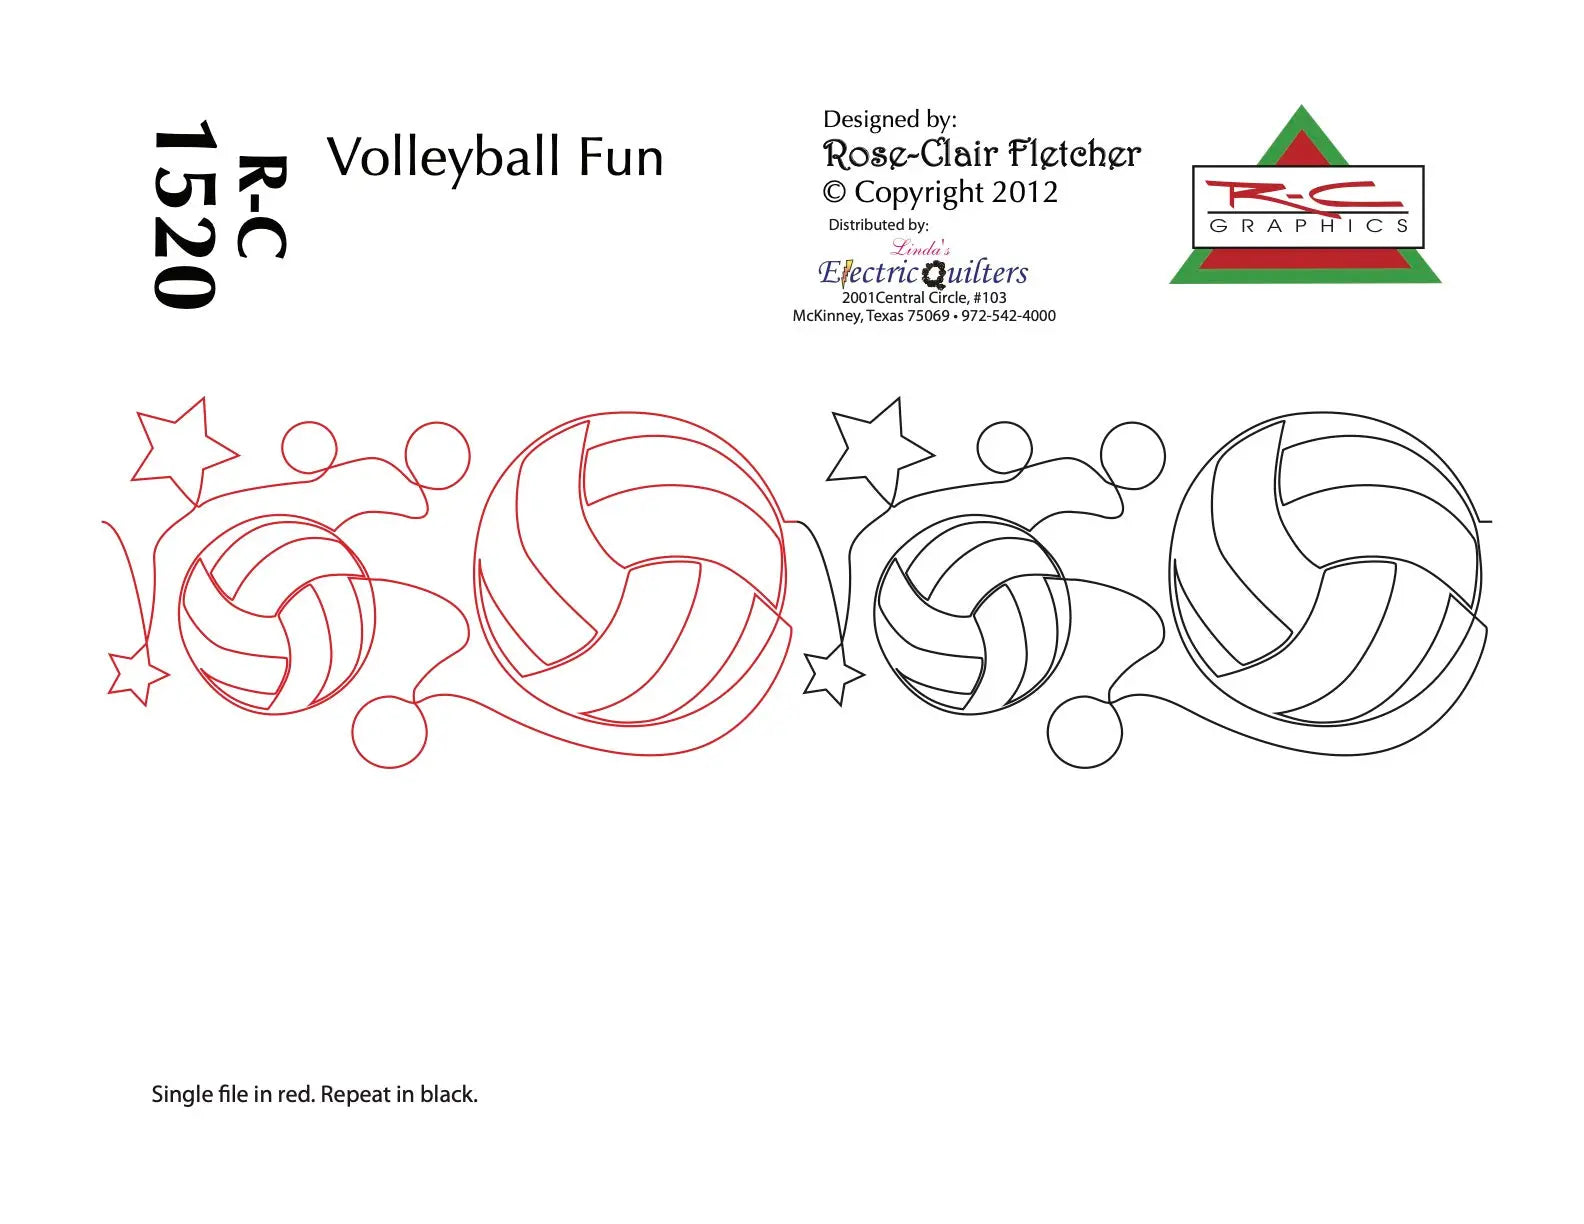 1520 Volleyball Fun Pantograph by Rose-Clair Fletcher - Linda's Electric Quilters